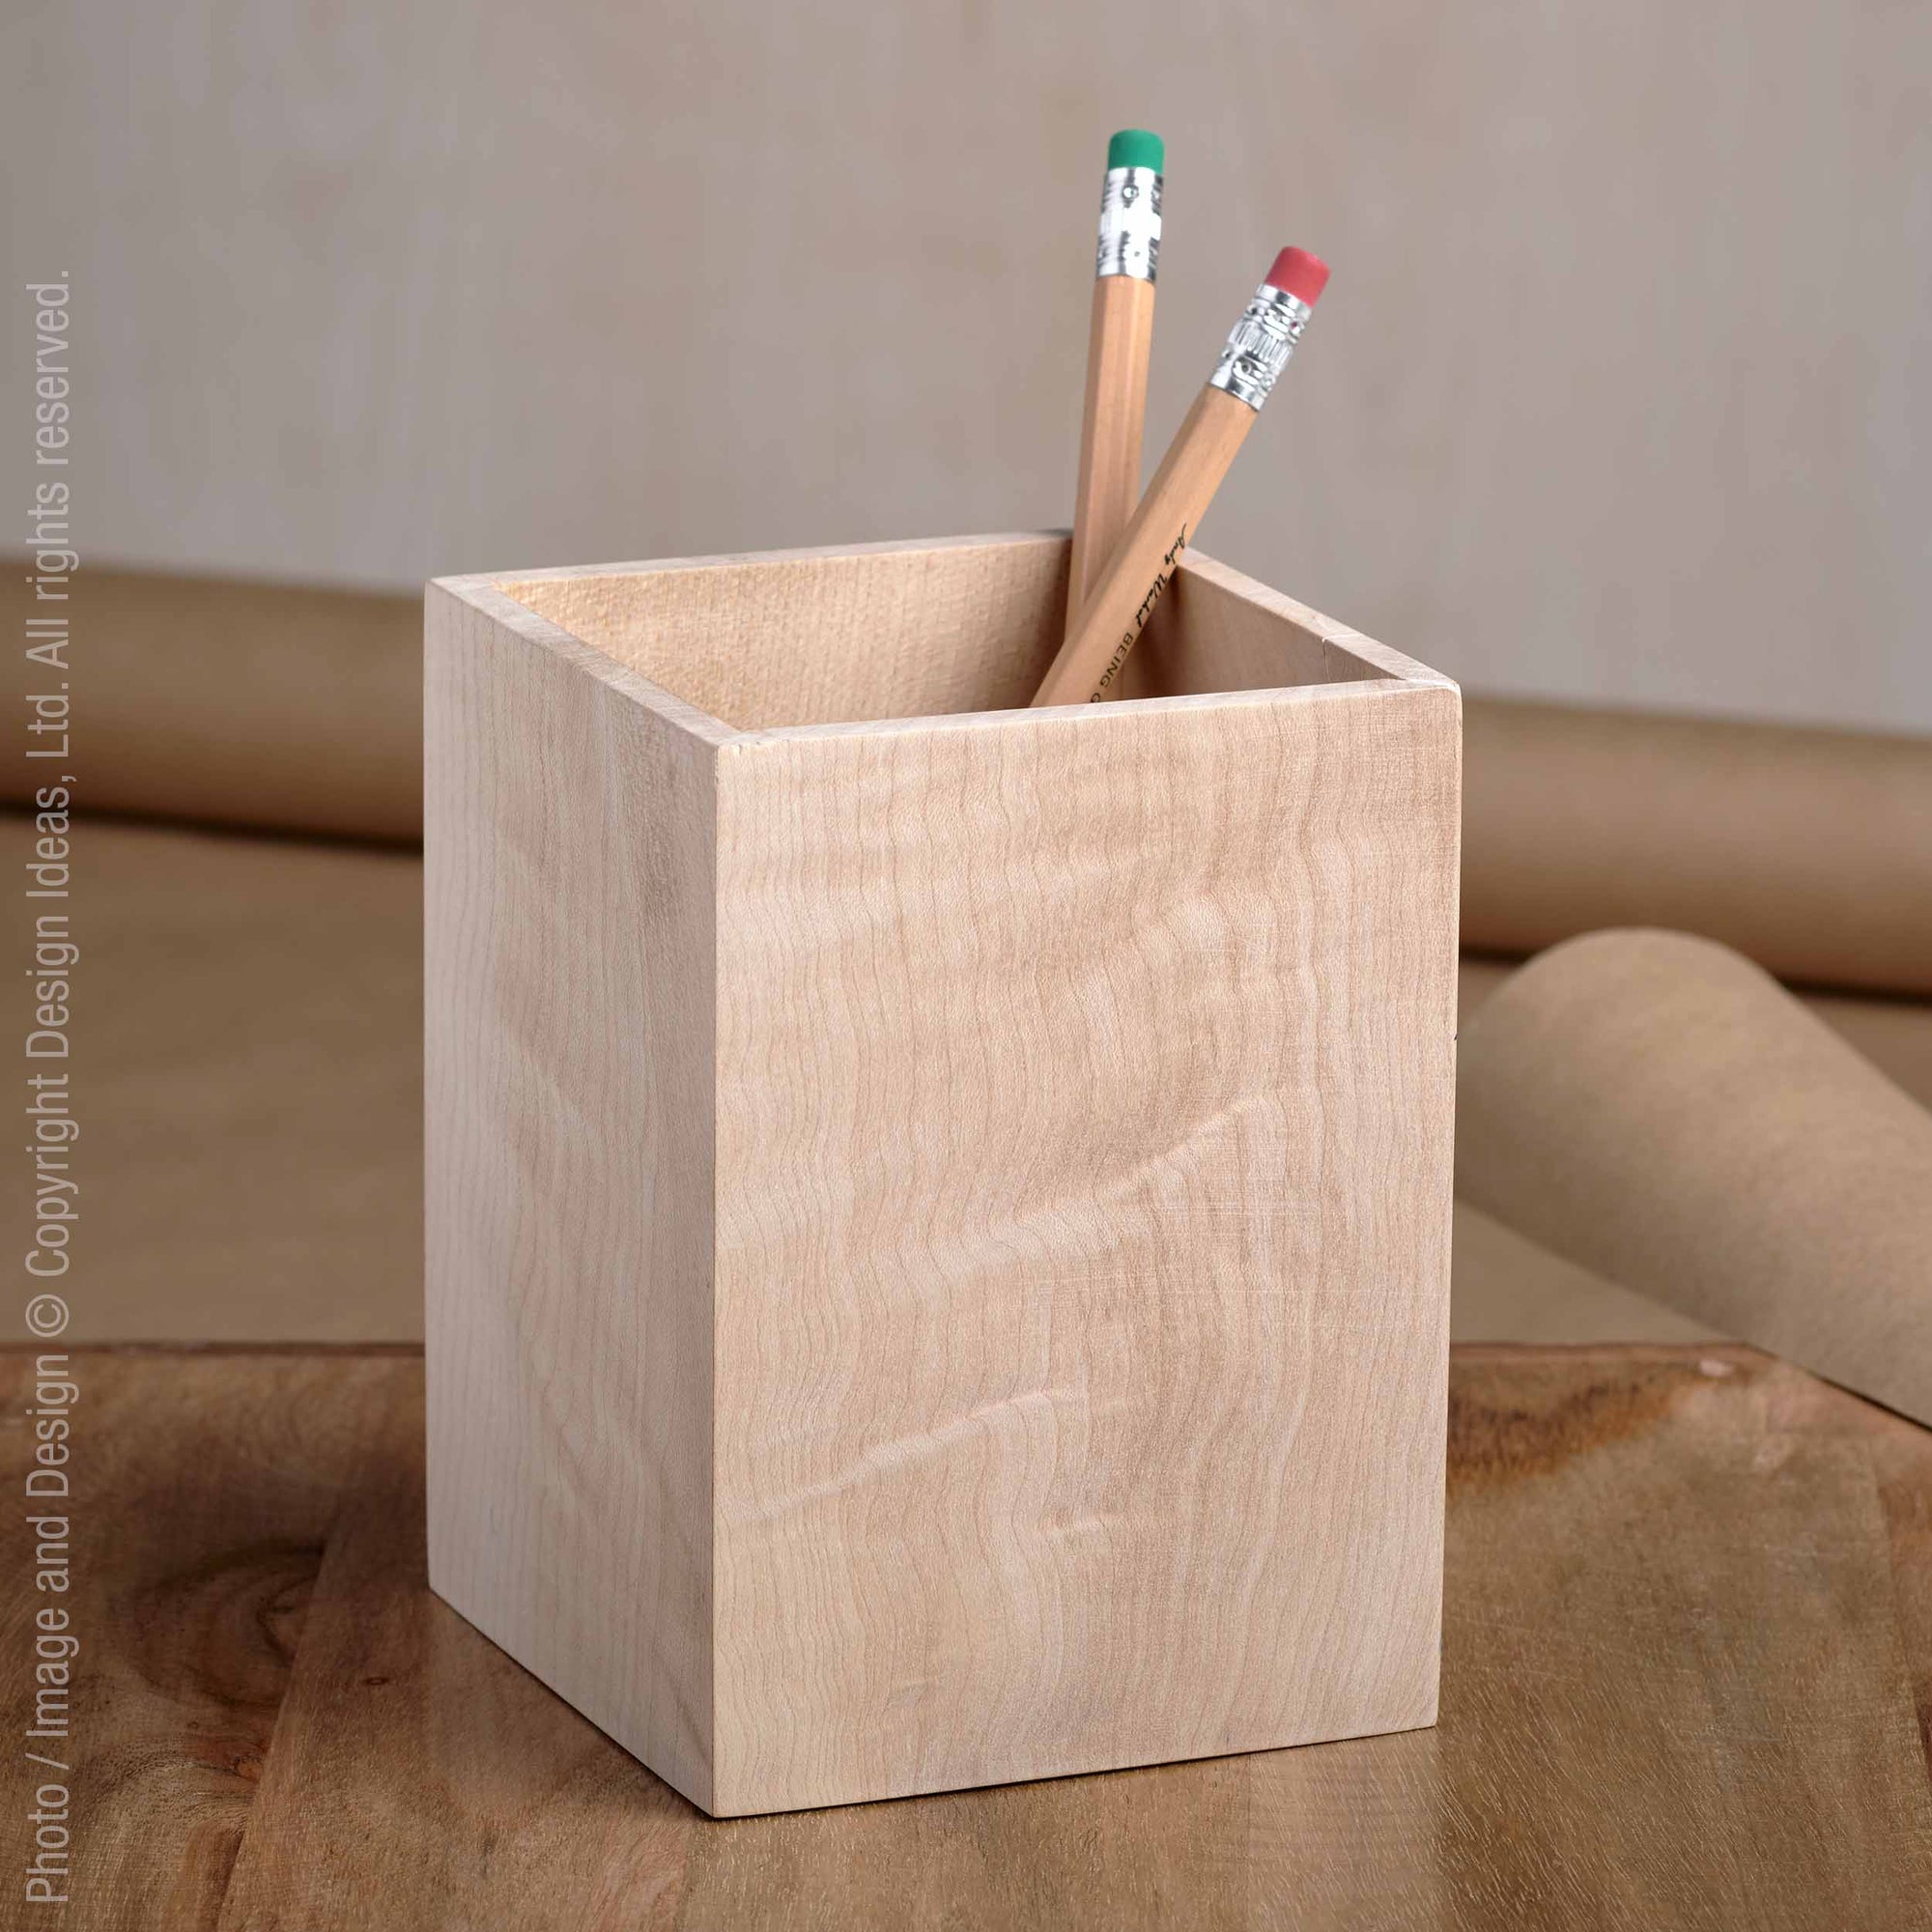 Upland™ pencil cup - Natural | Image 1 | Premium Organizer from the Upland collection | made with Sycamore for long lasting use | texxture